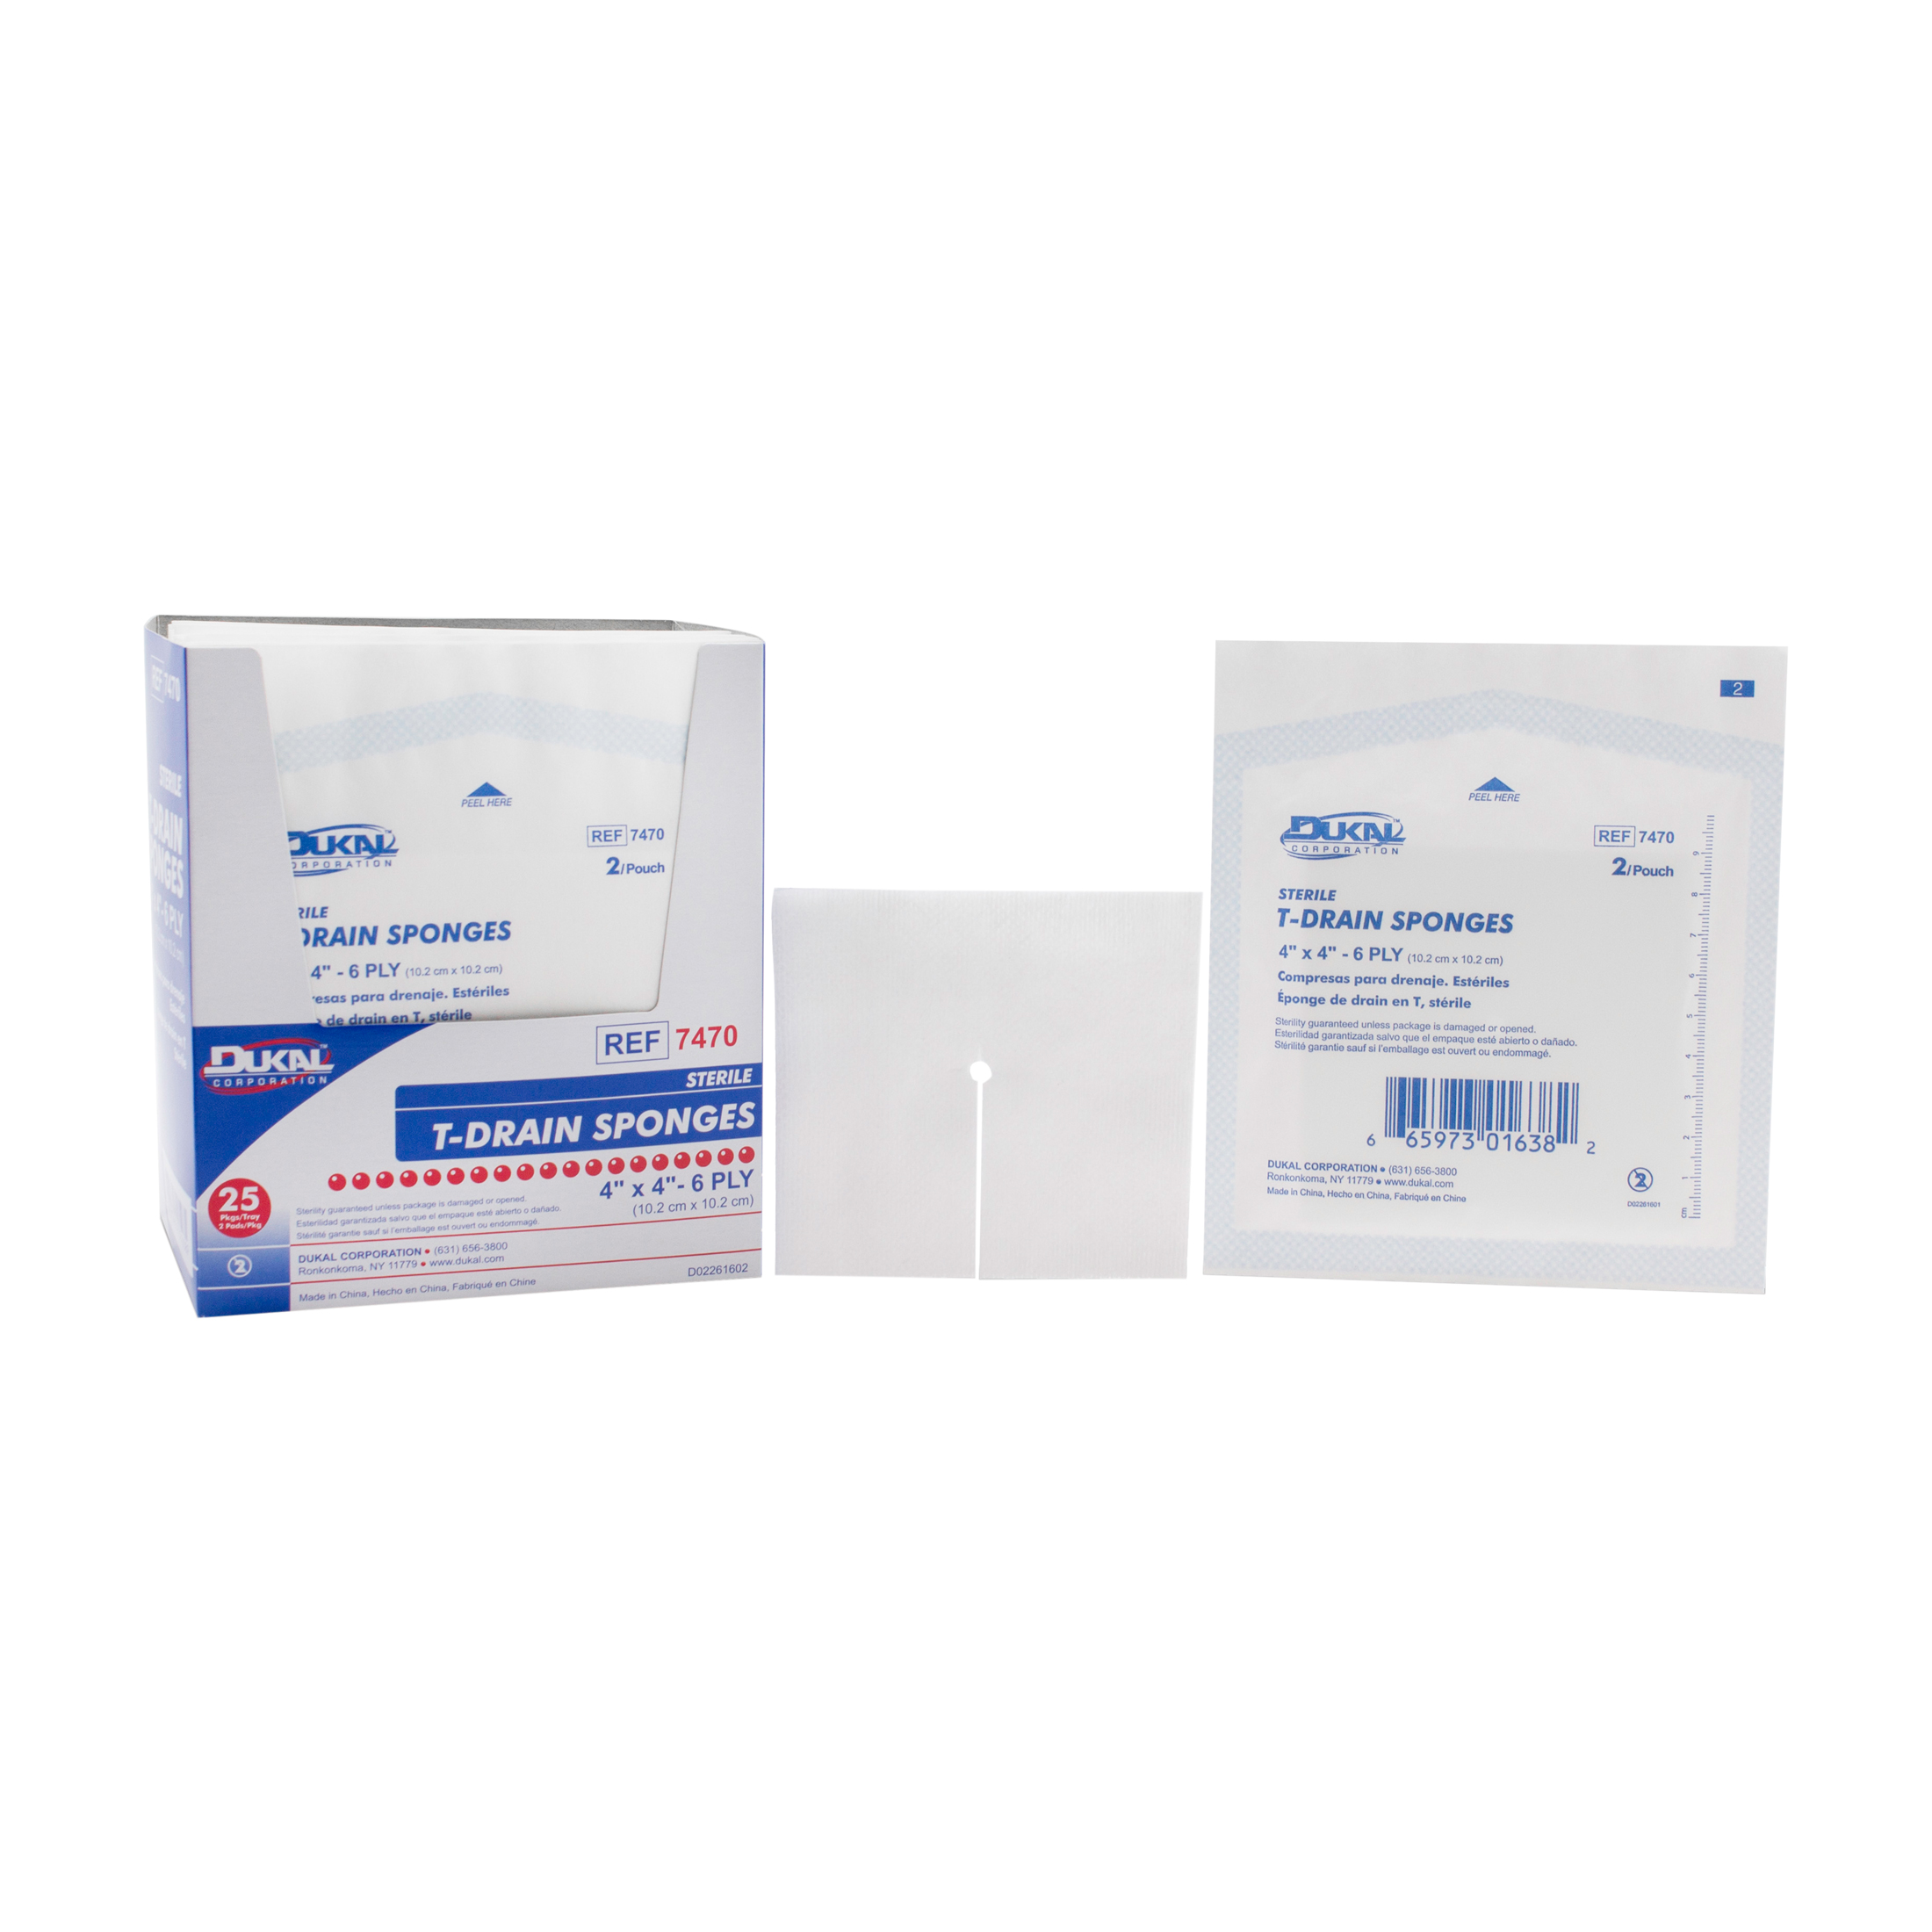 Airway Management Products, Supplies and Equipment